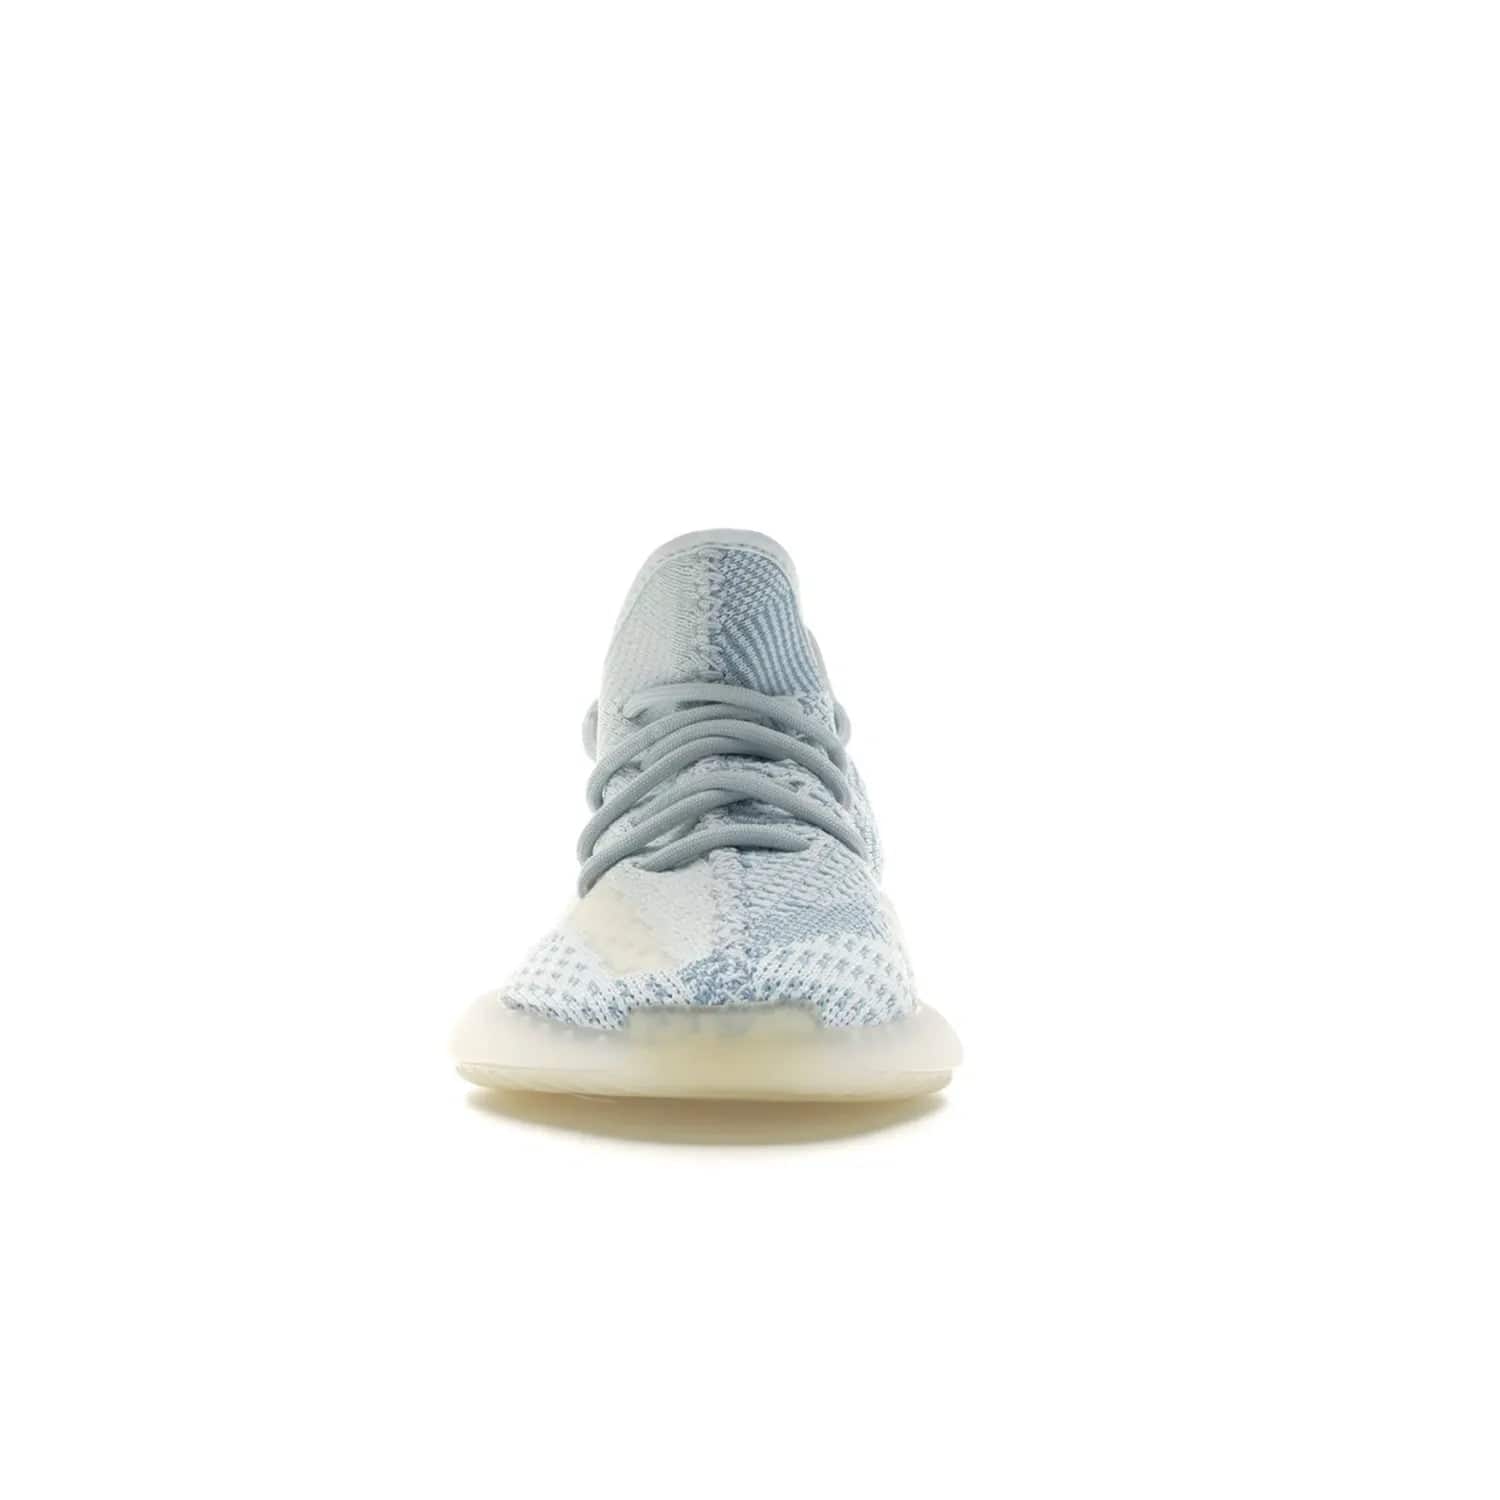 adidas Yeezy Boost 350 V2 Cloud White (Non-Reflective) - Image 10 - Only at www.BallersClubKickz.com - Uniquely designed adidas Yeezy Boost 350 V2 Cloud White (Non-Reflective) with a Primeknit upper in shades of cream and blue with a contrasting hard sole. A fashion-forward sneaker with a transparent strip and blue-and-white patterns.